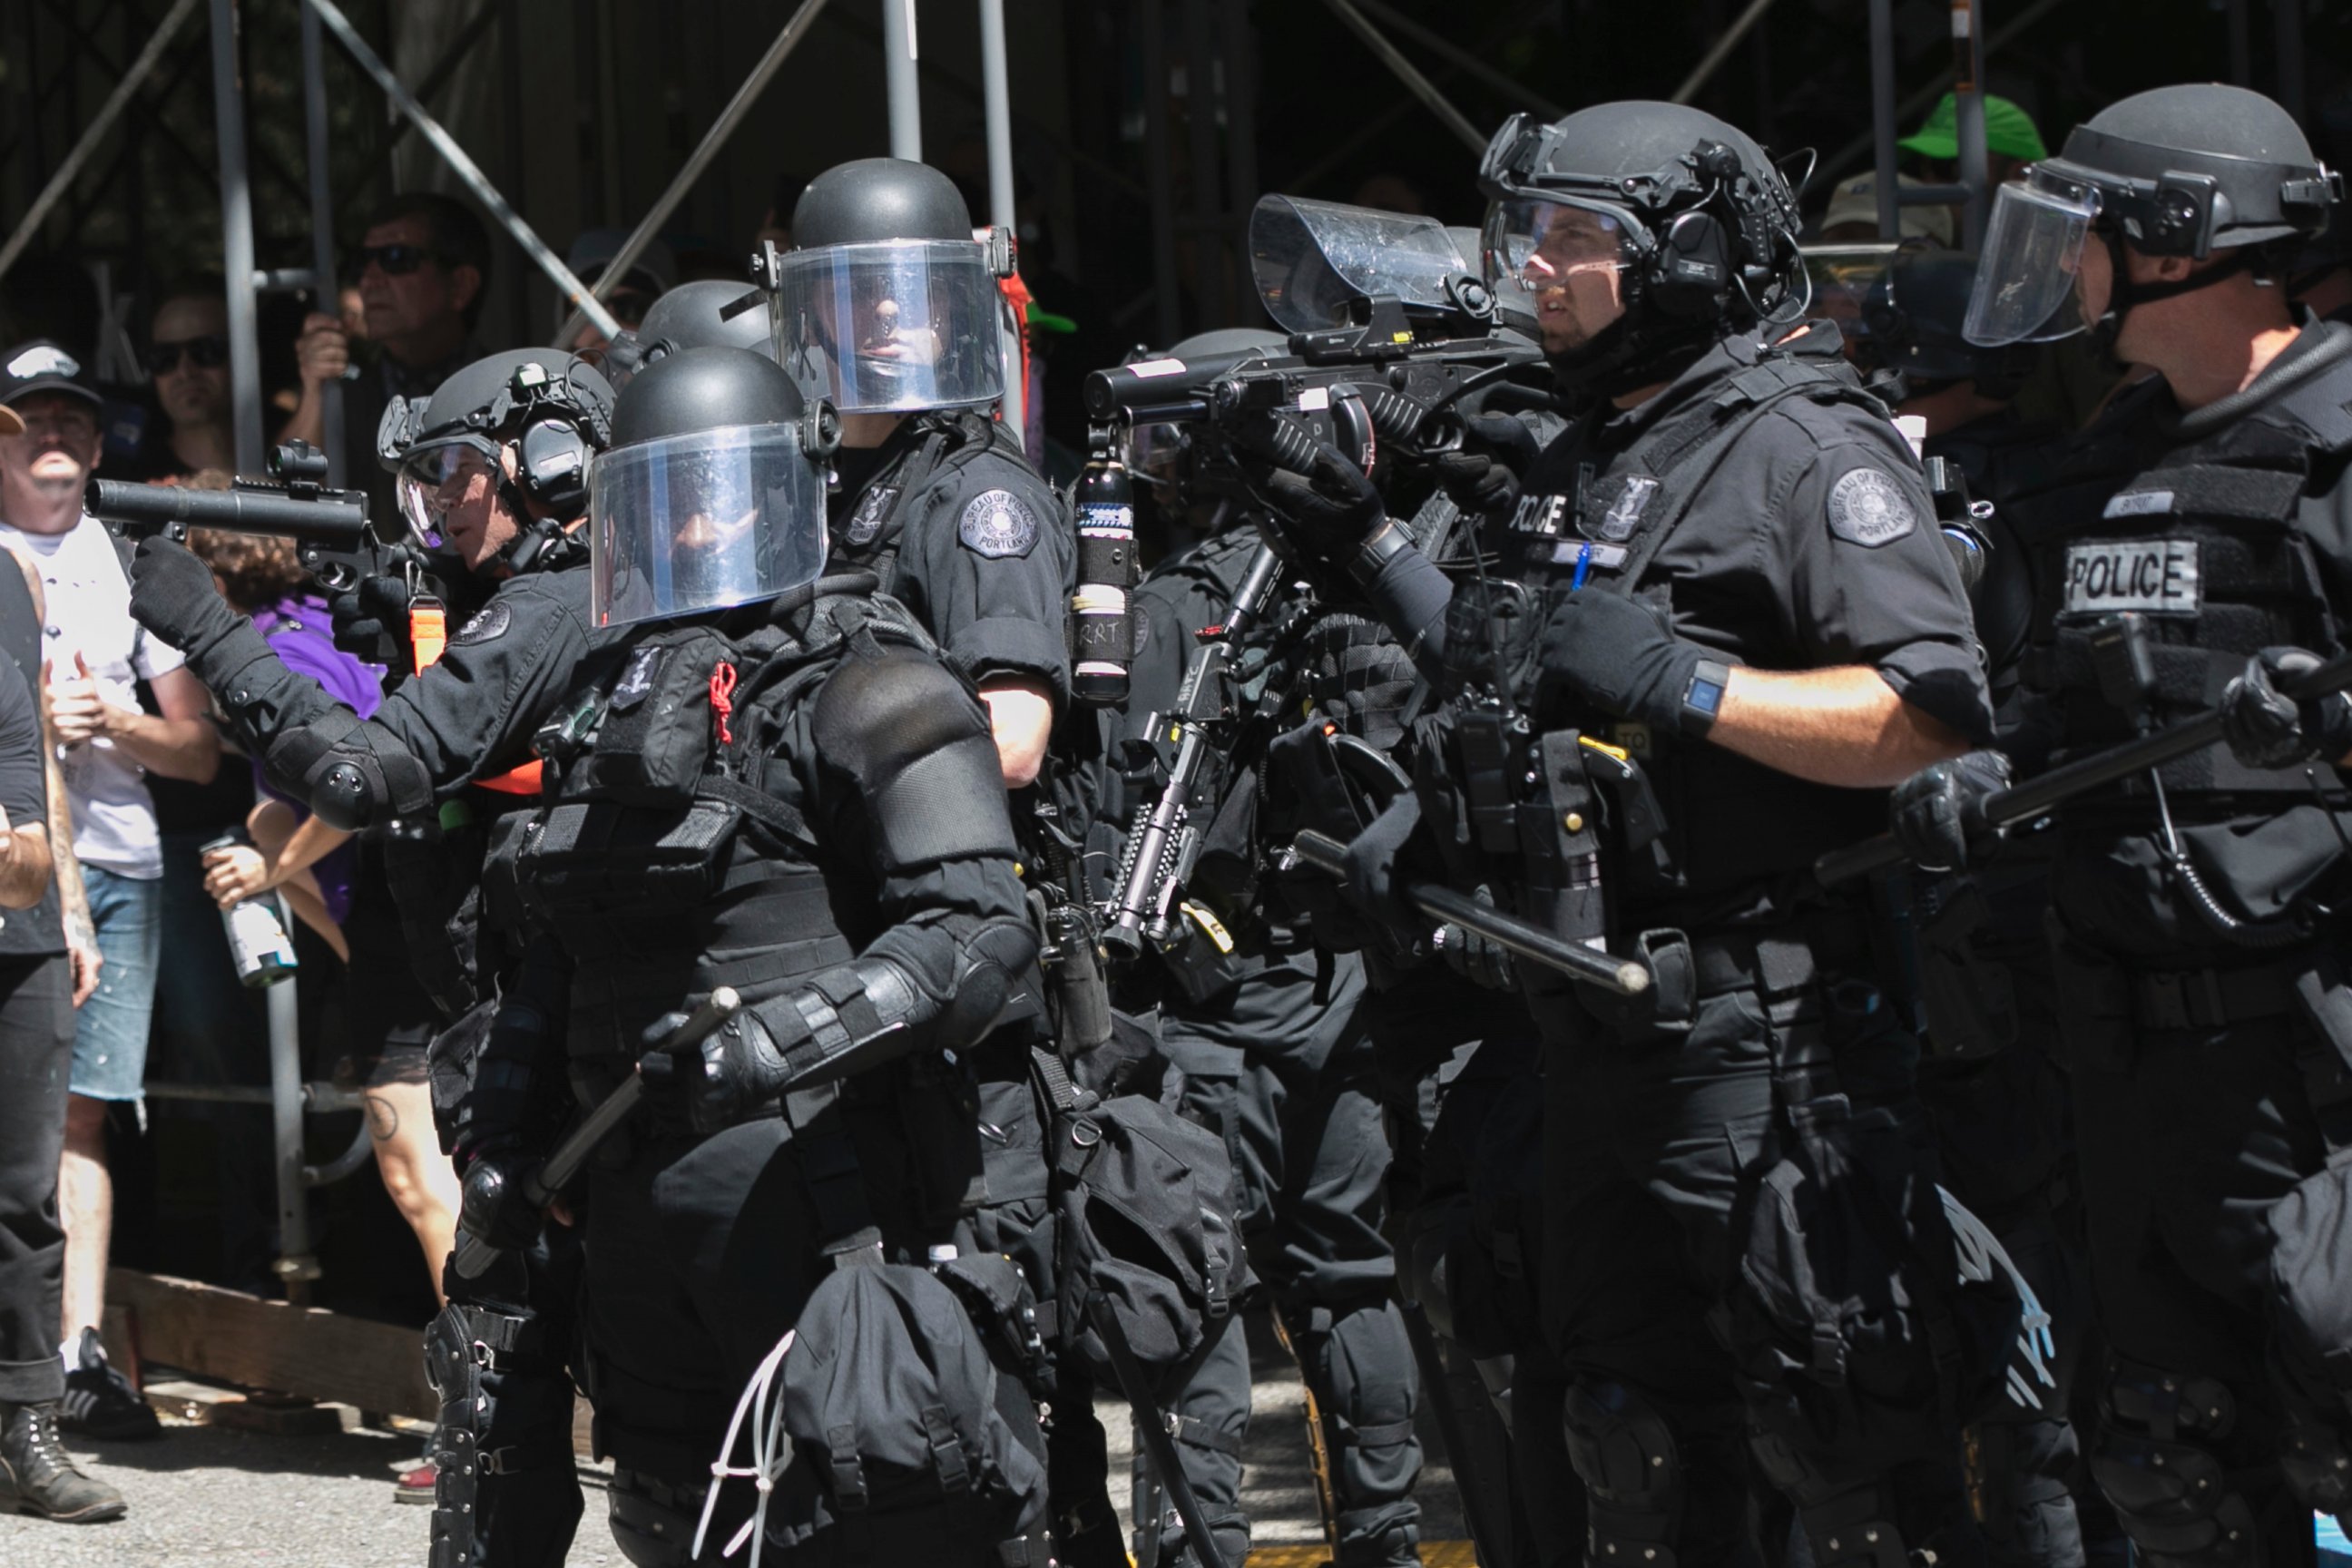 Police move in on protesters during a rally in Portland, Ore., Saturday, Aug. 4, 2018. Small scuffles broke out Saturday as police in Portland, Oregon, deployed "flash bang" devices to disperse hundreds of right-wing and anti-fascist protesters.